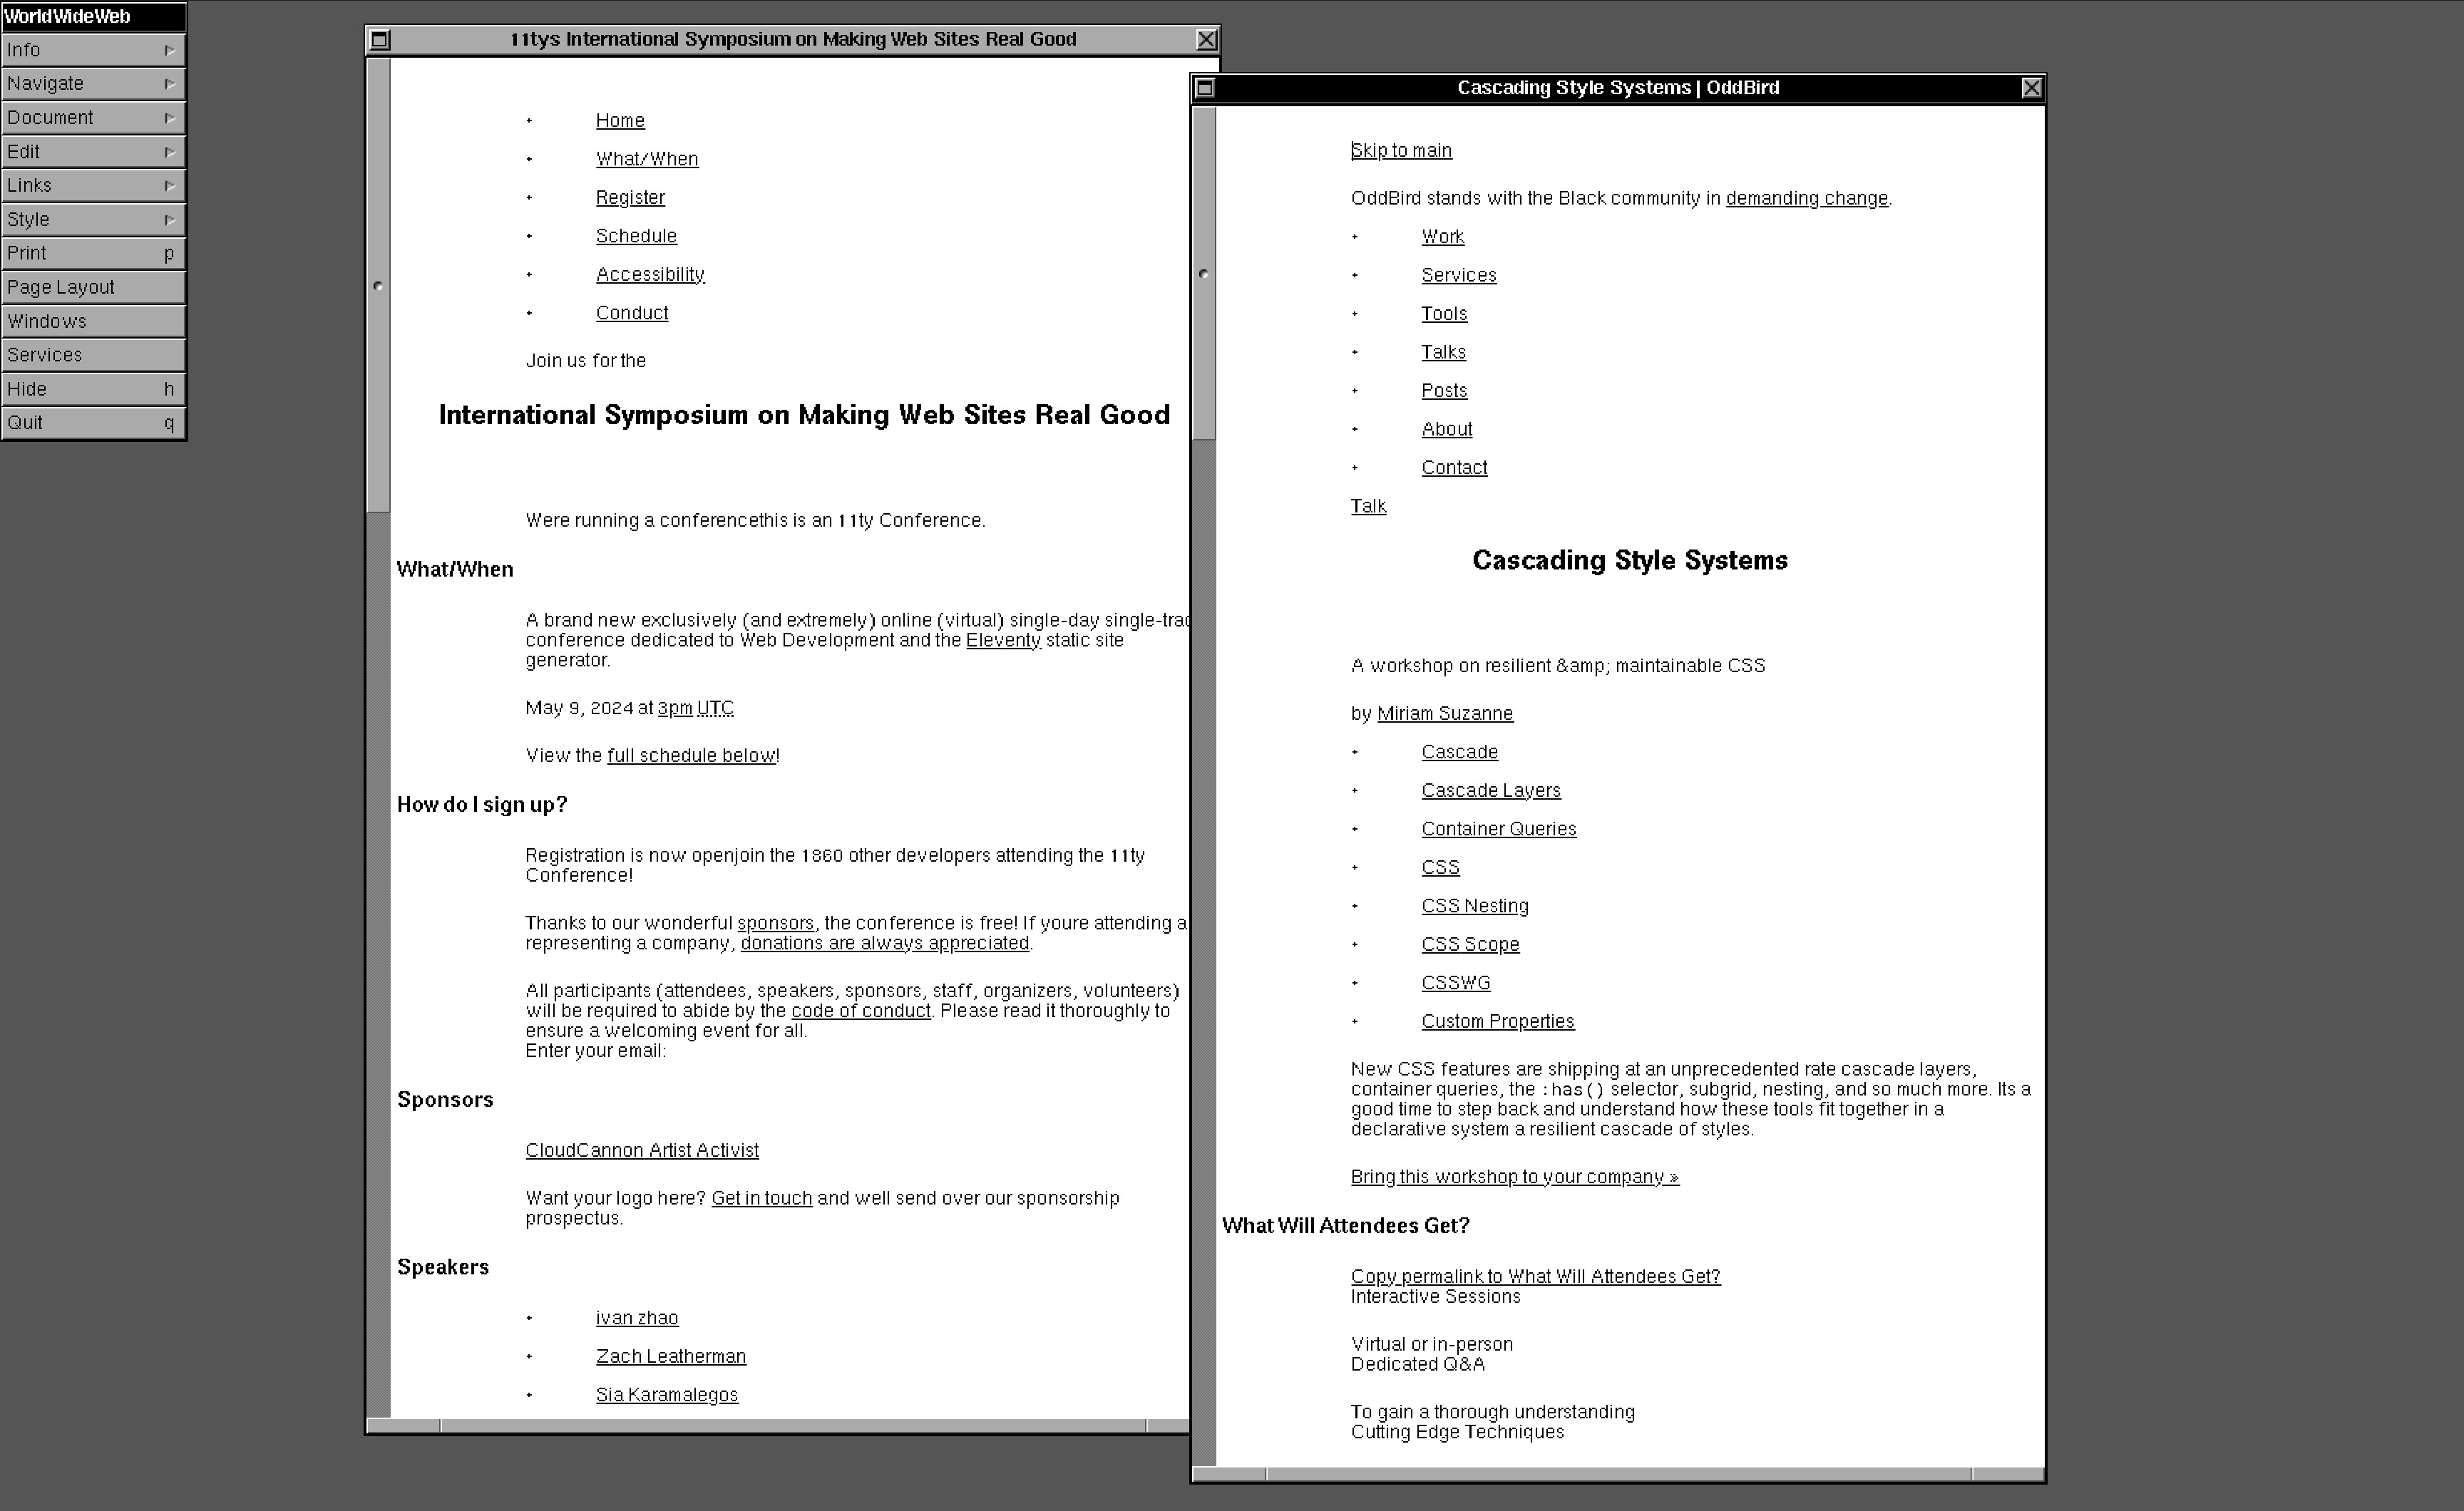 11ty symposium site and oddbird CSS workshop pages displayed as black and white text on the WWW browser emulator
